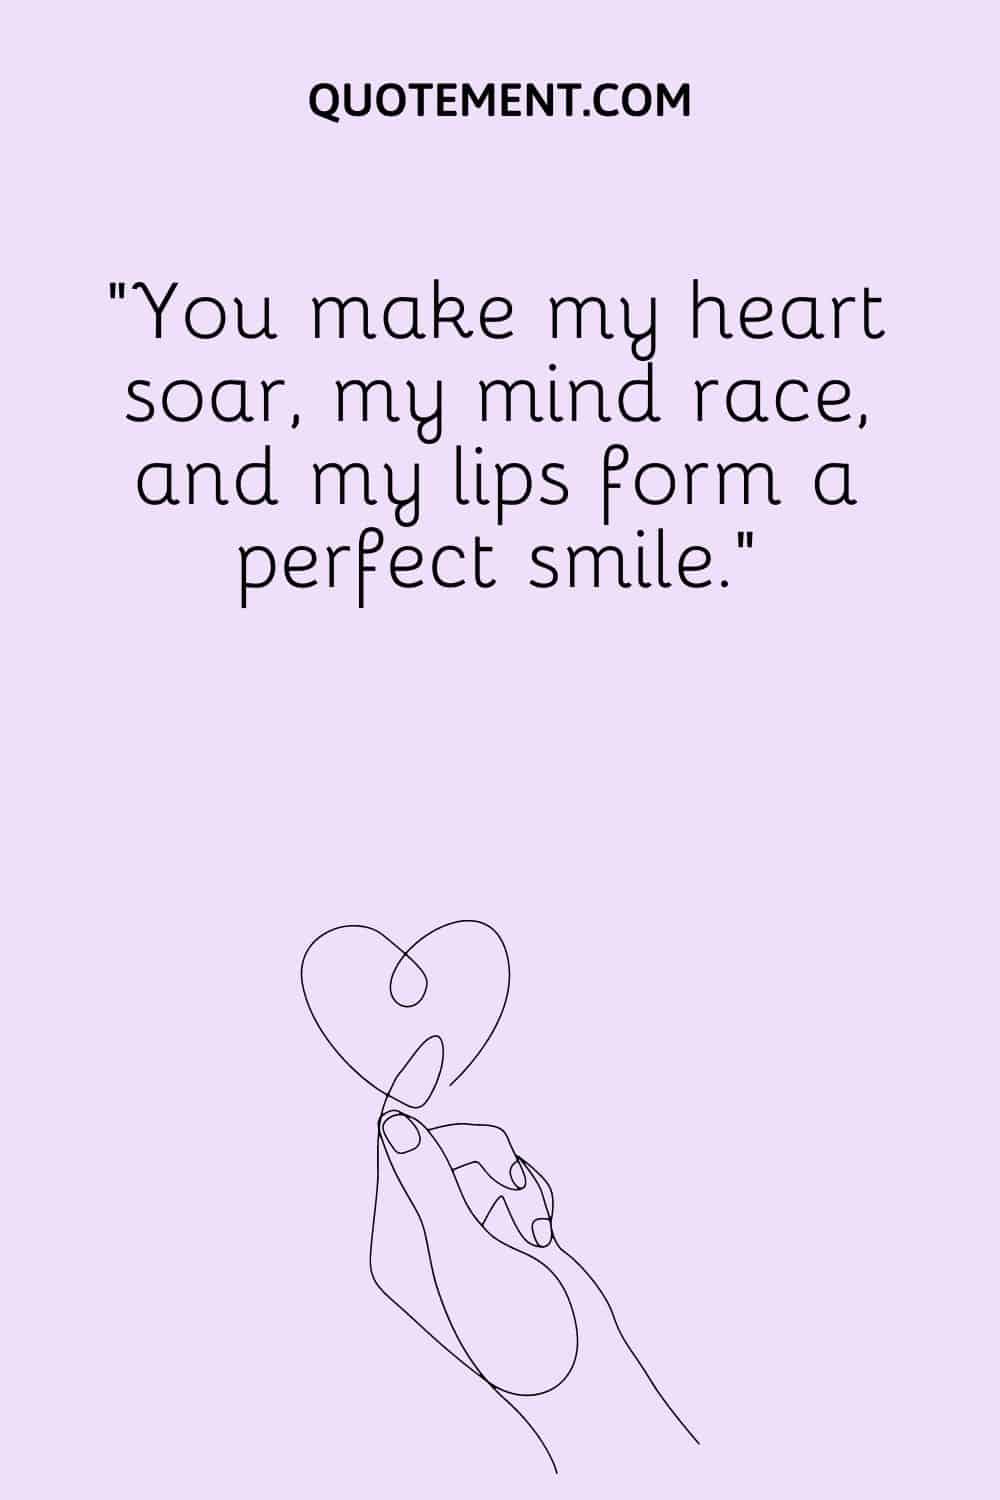 You make my heart soar, my mind race, and my lips form a perfect smile